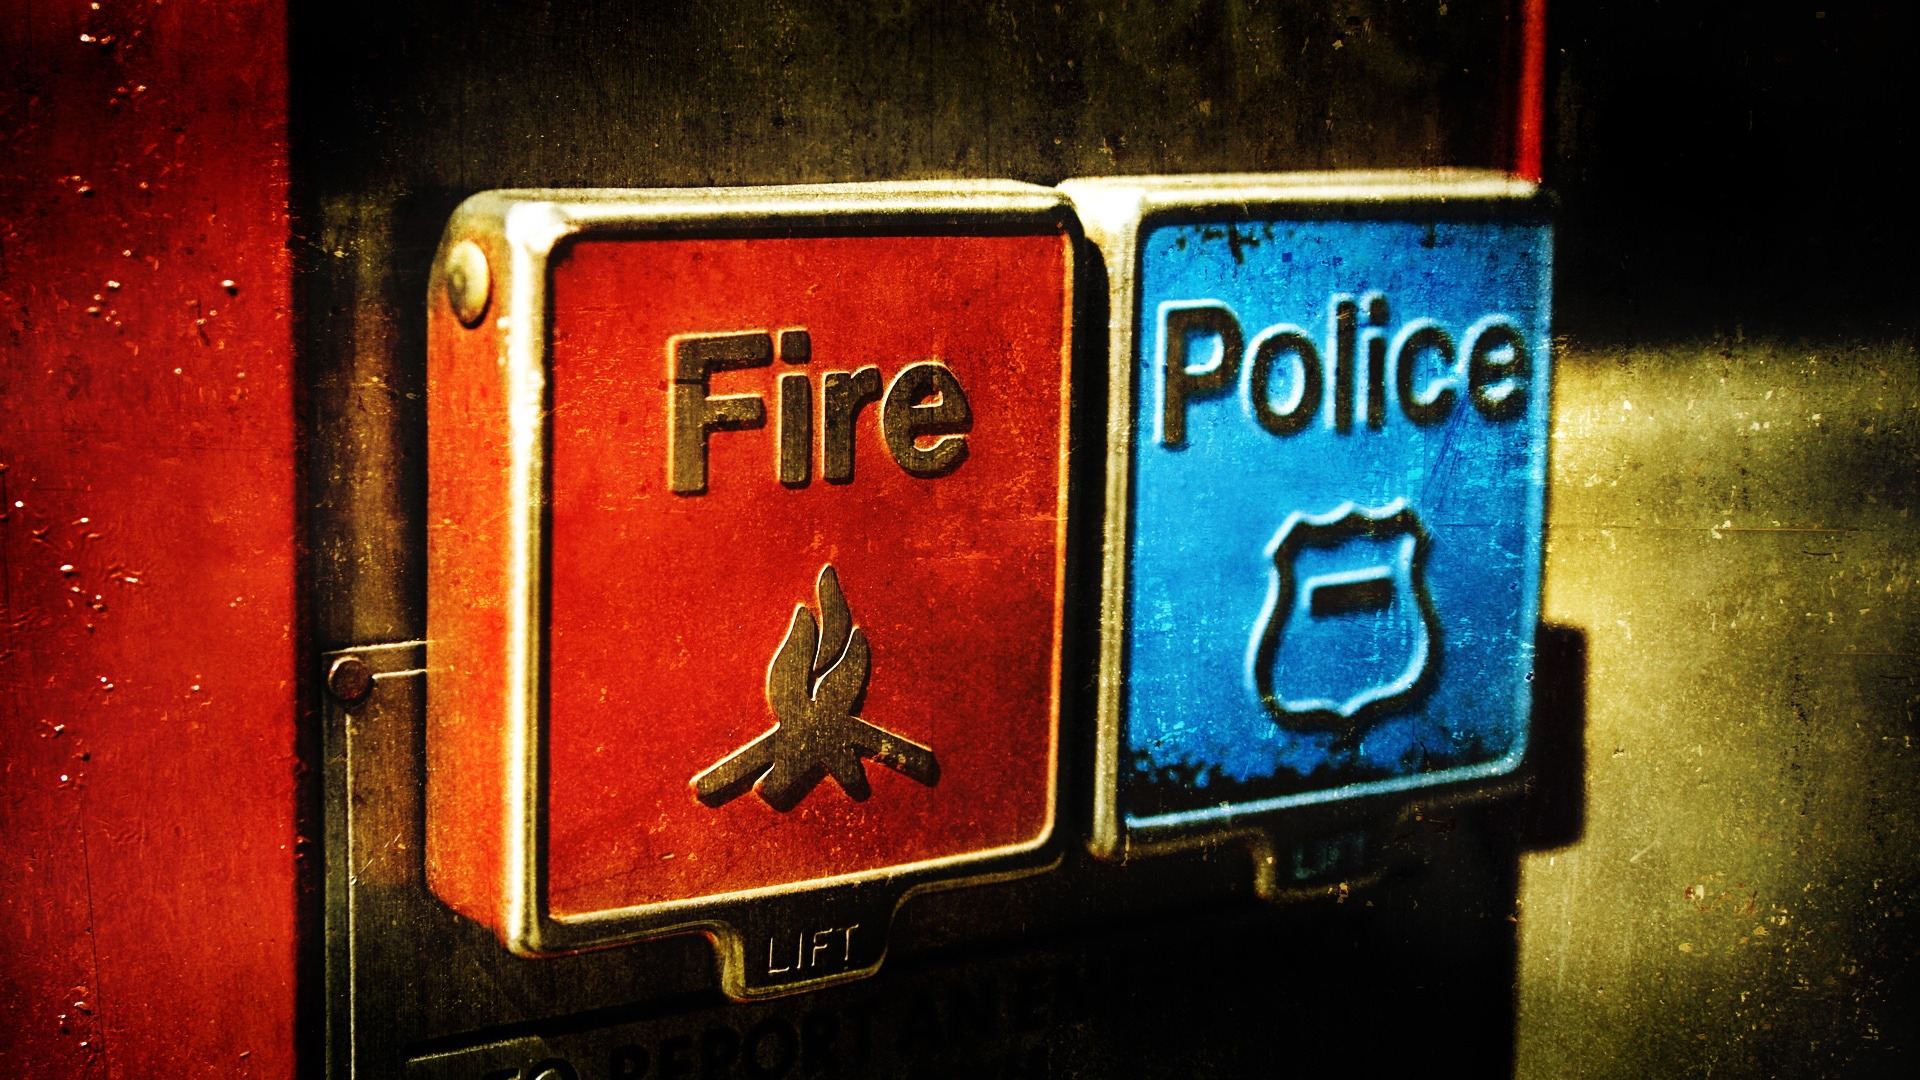 Emergency Fire and Police for 1920 x 1080 HDTV 1080p resolution